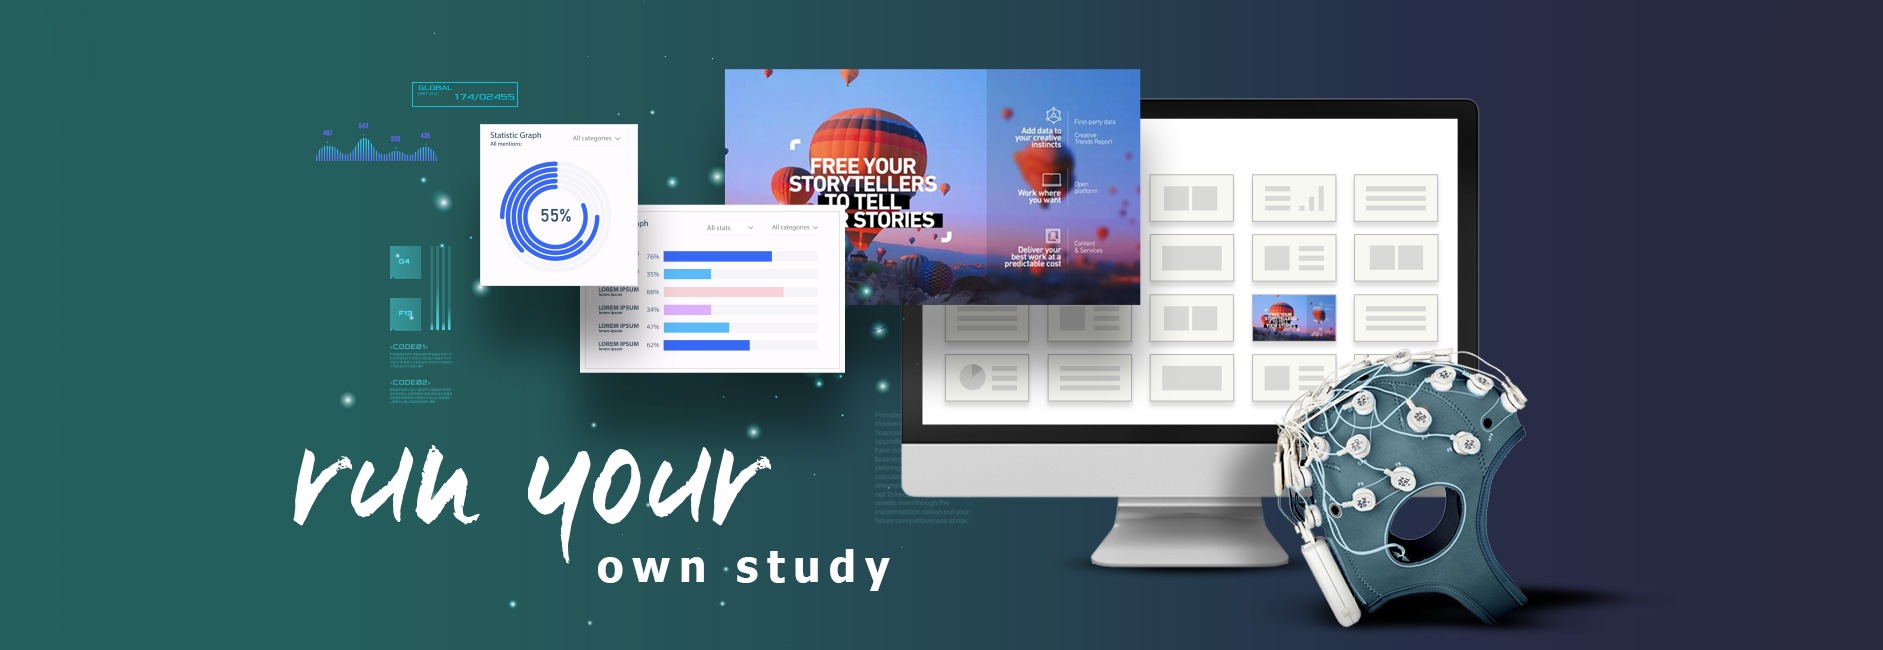 Run Your Own Study